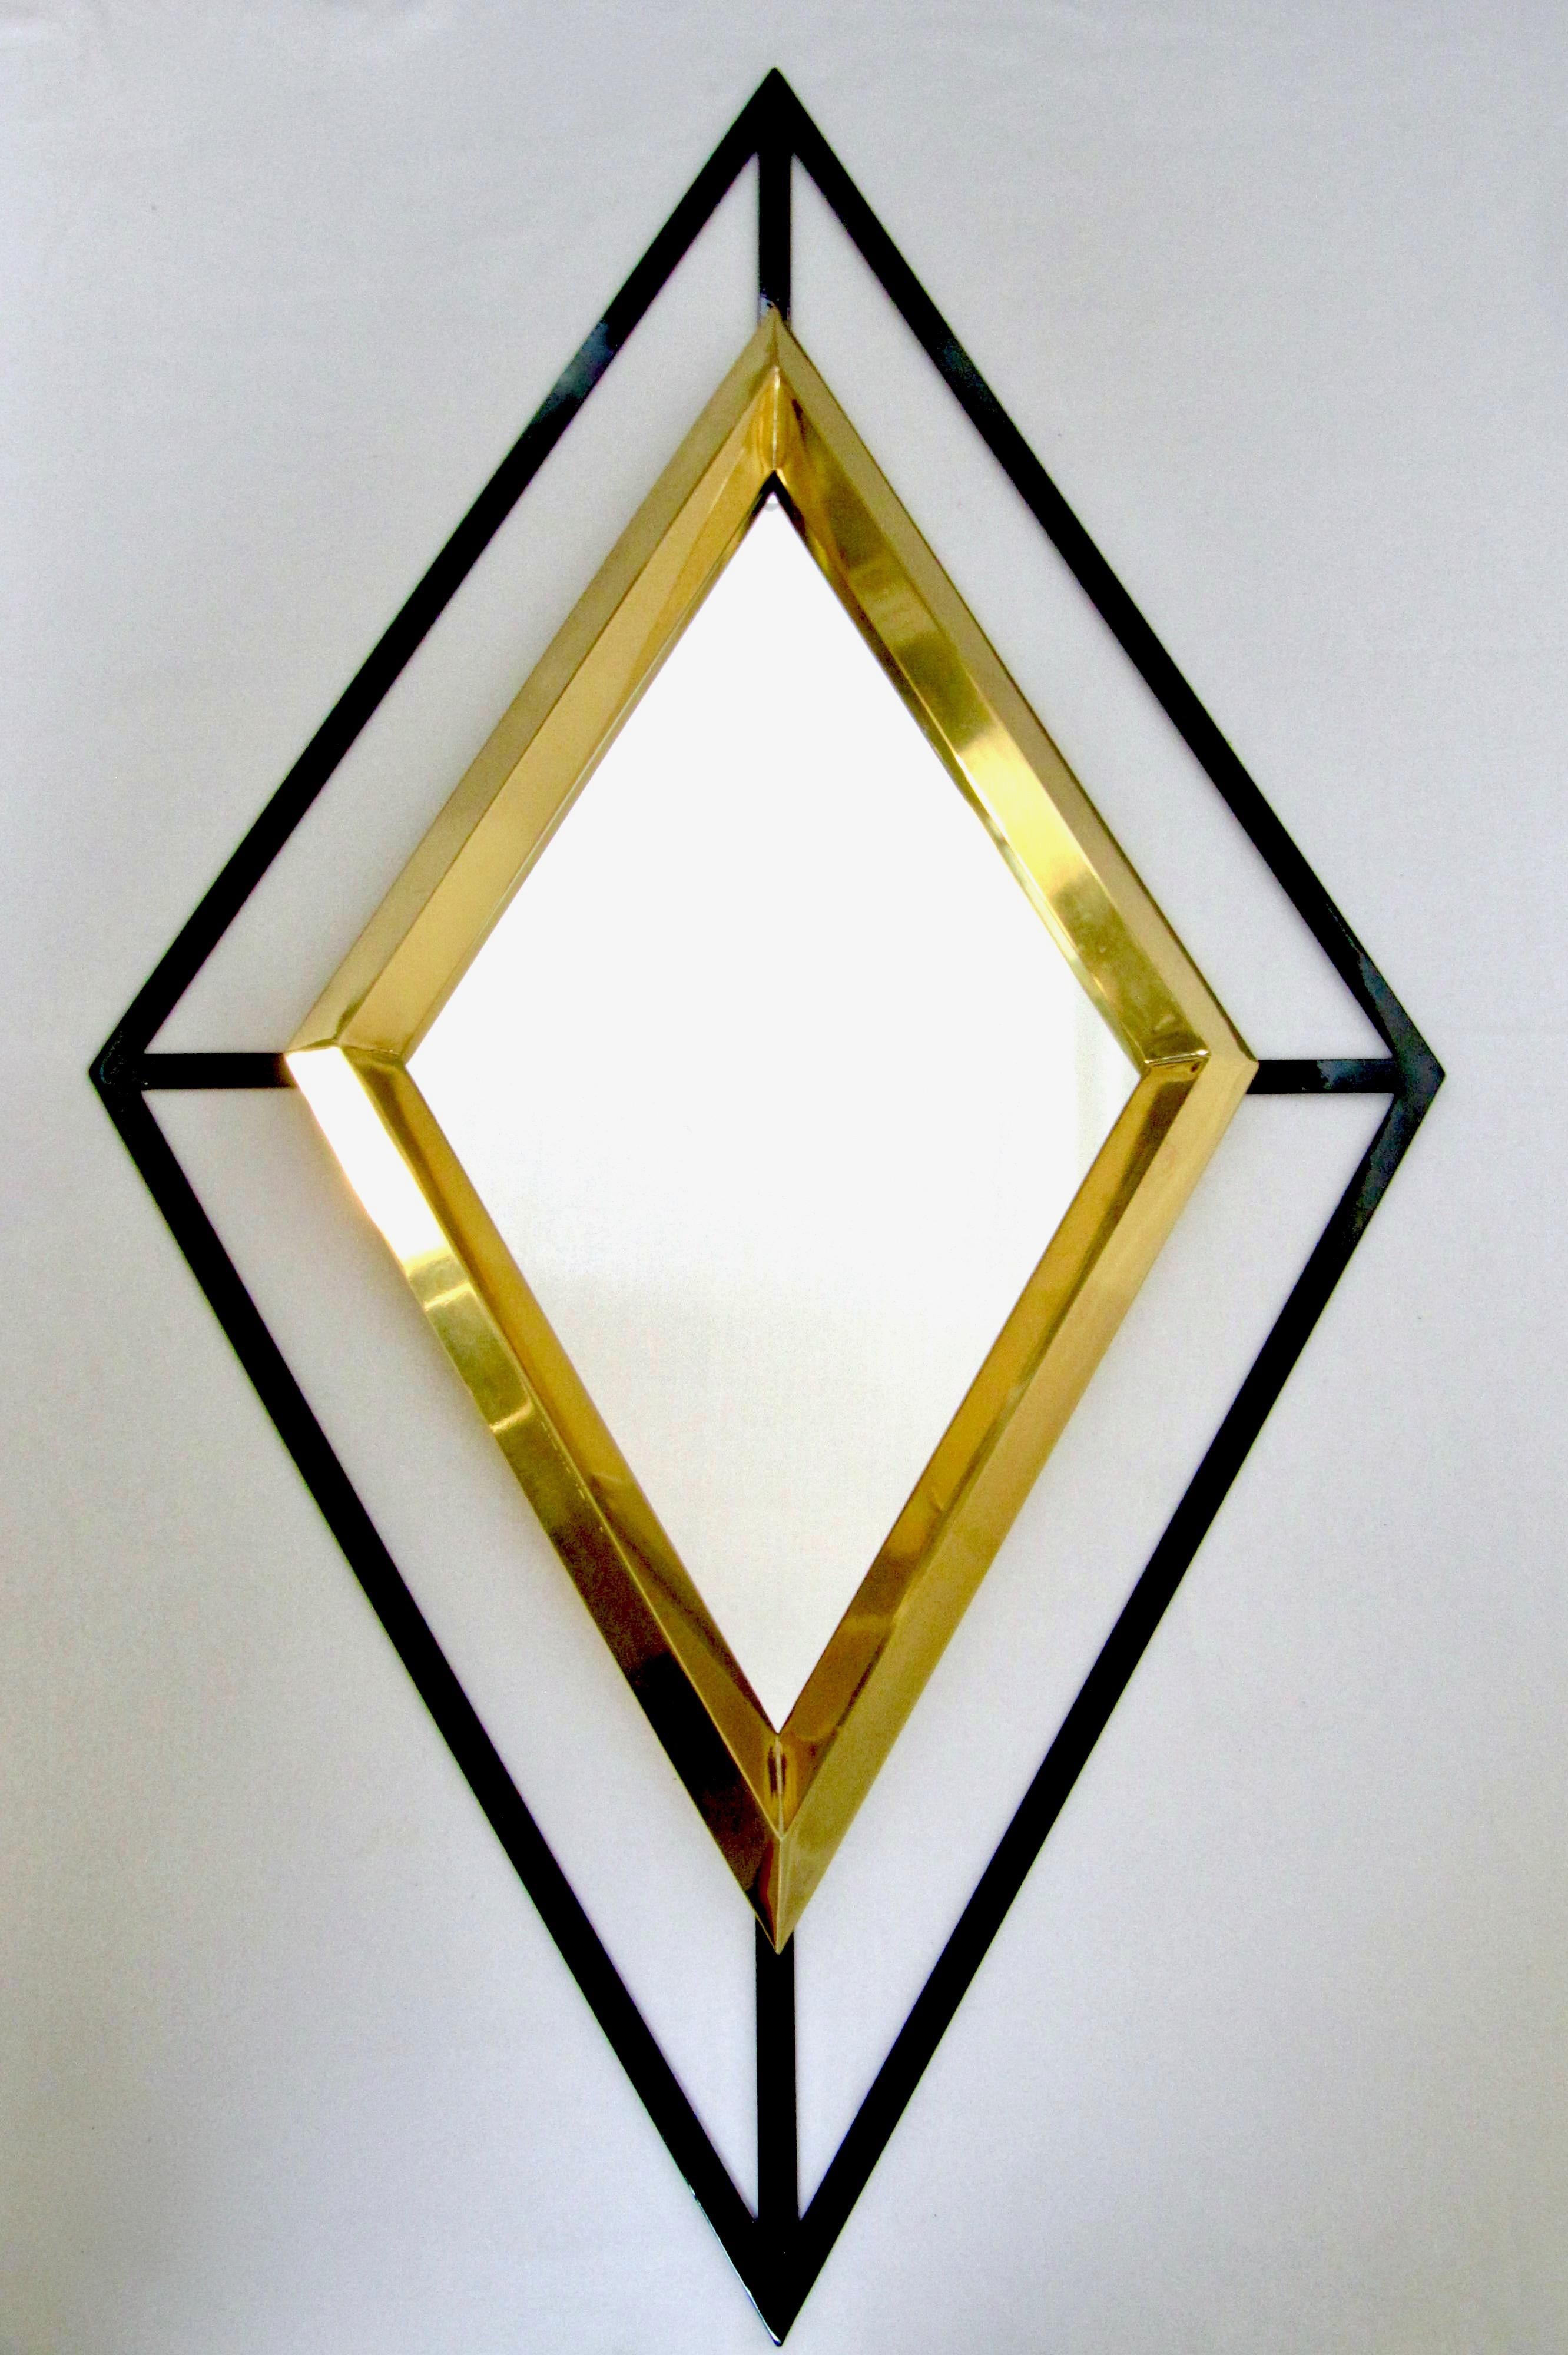 Diamante mirror by Nicola Falcone

Statement mirror. 

The shape of a luxurious diamond in Brushed brass and an iron structure painted in black or red. 

Handmade in Italy.